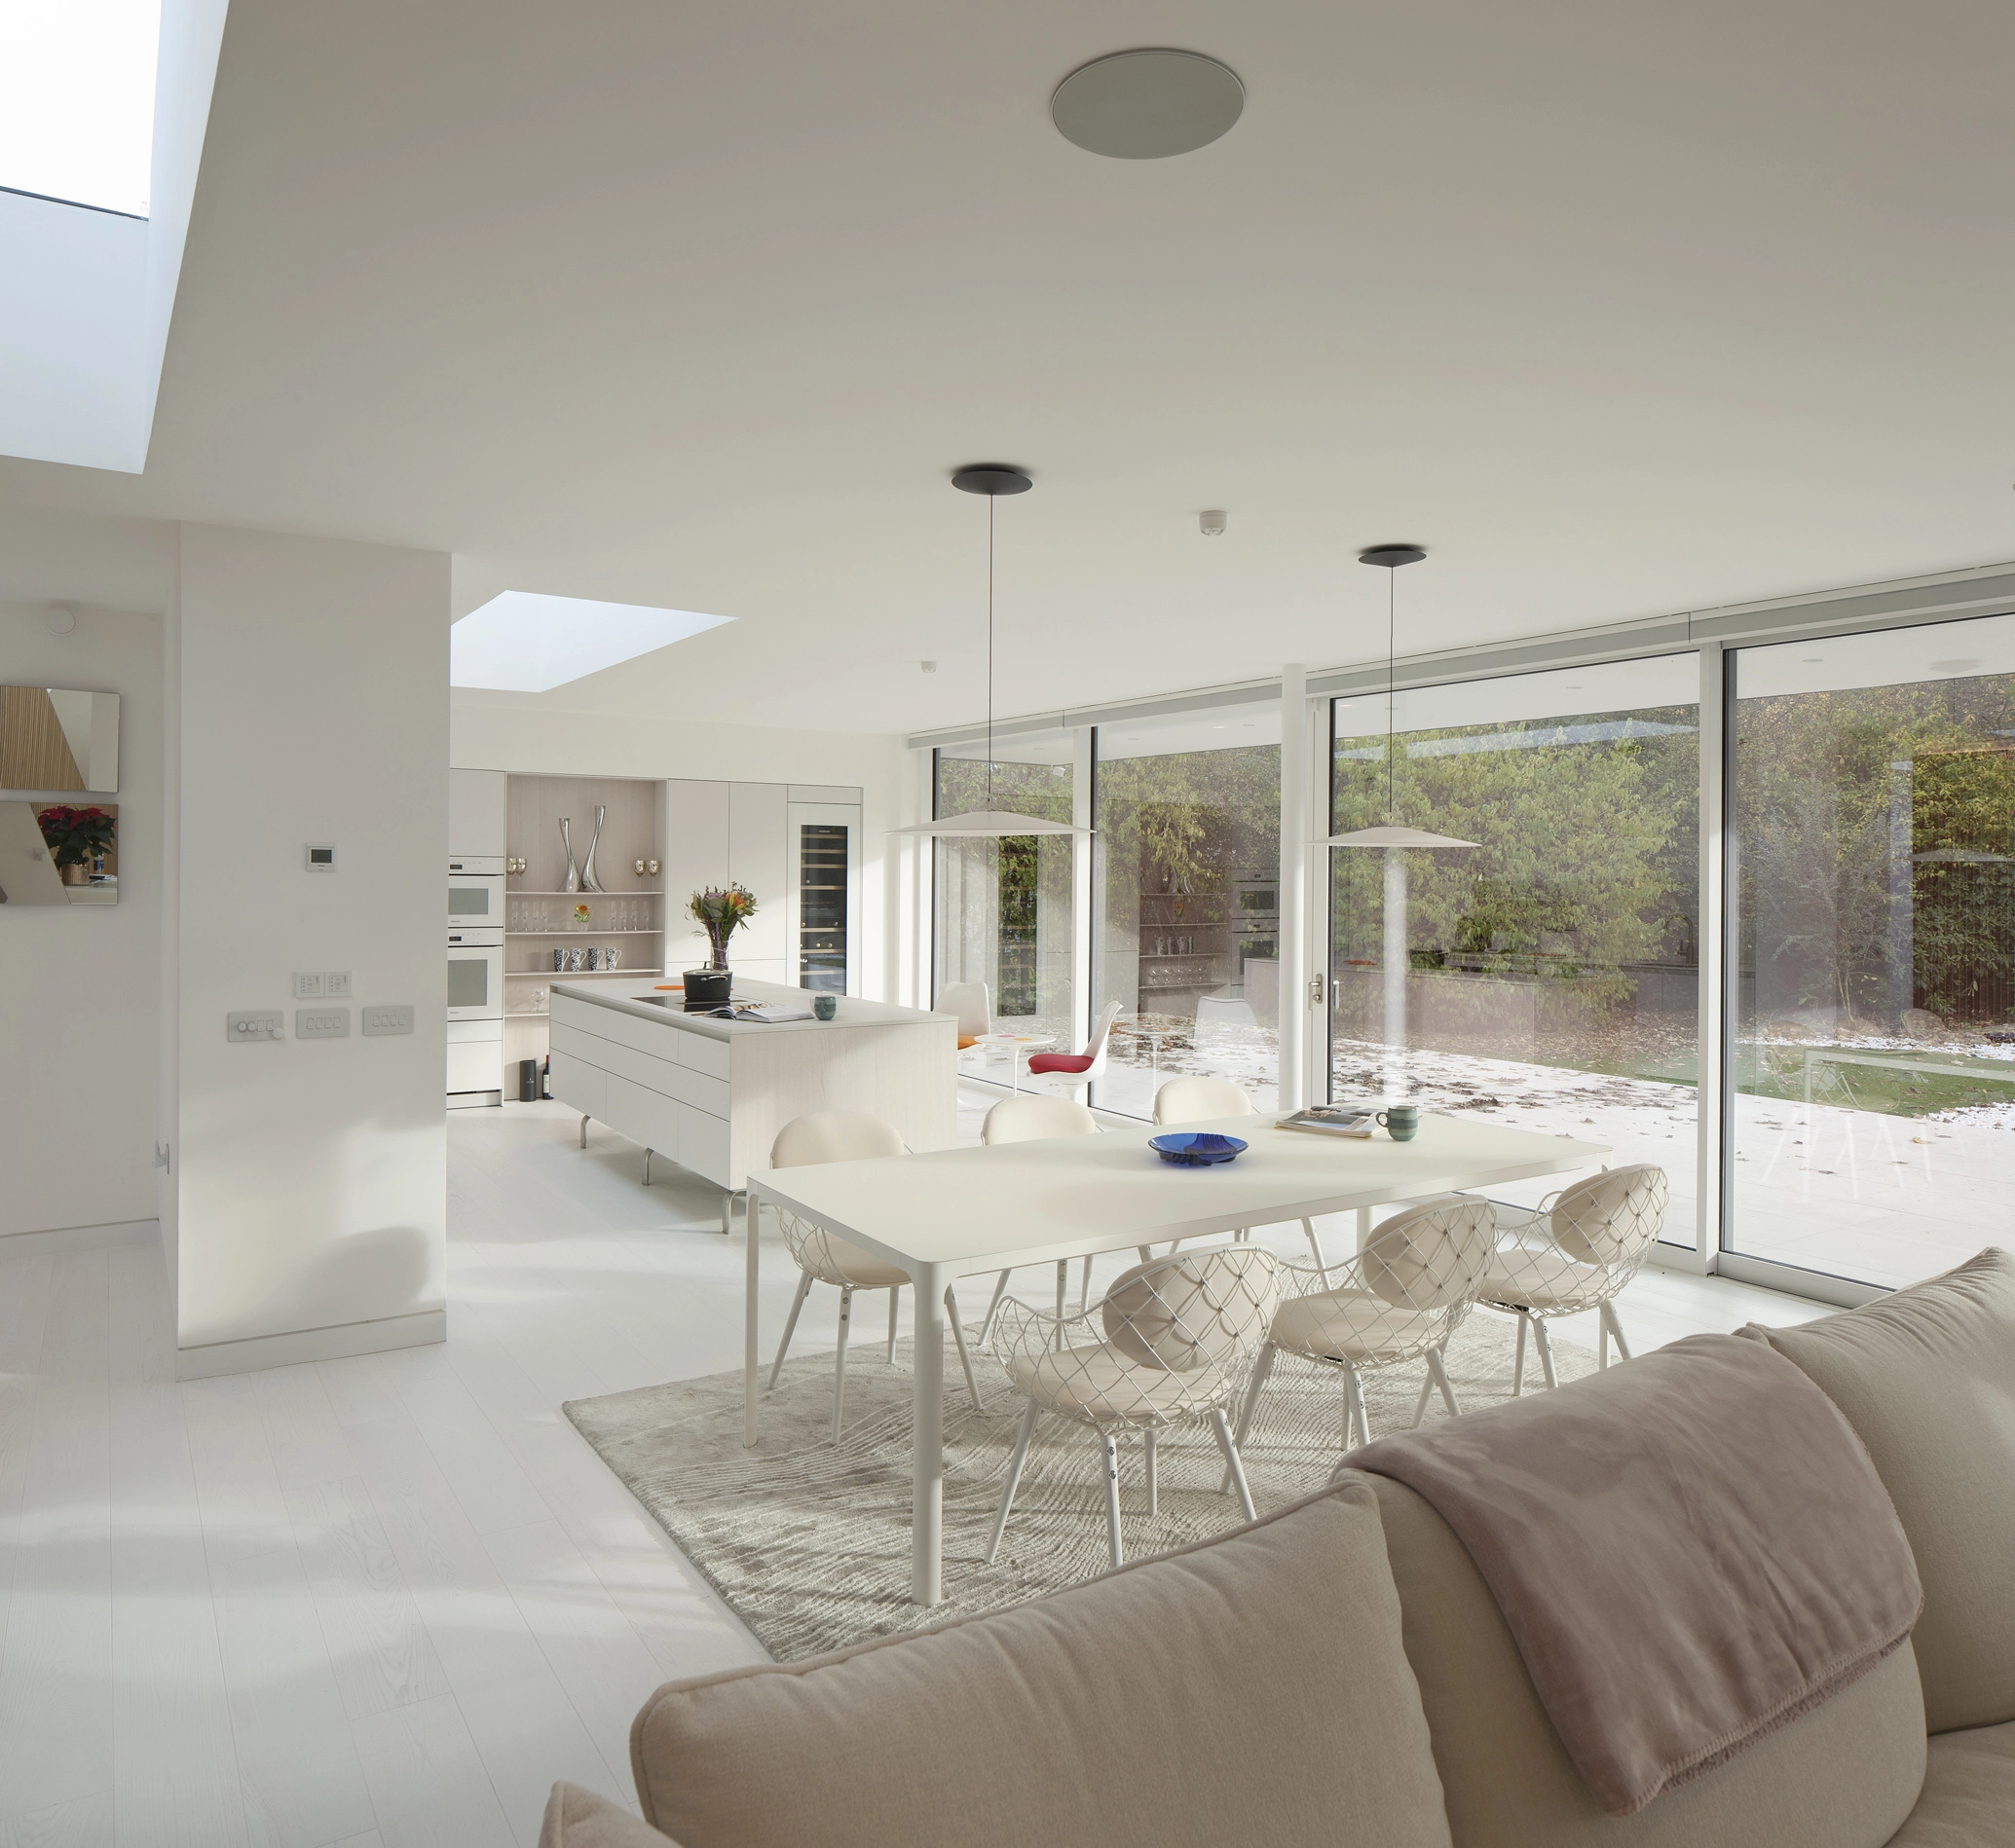 The open-plan-living, dining and kitchen of a recently renovated home designed by NVDC architects in Glasgow, with white walls and hardwood timber floors, strategically placed rooflights to provide lots of natural light and a bespoke kitchen design.